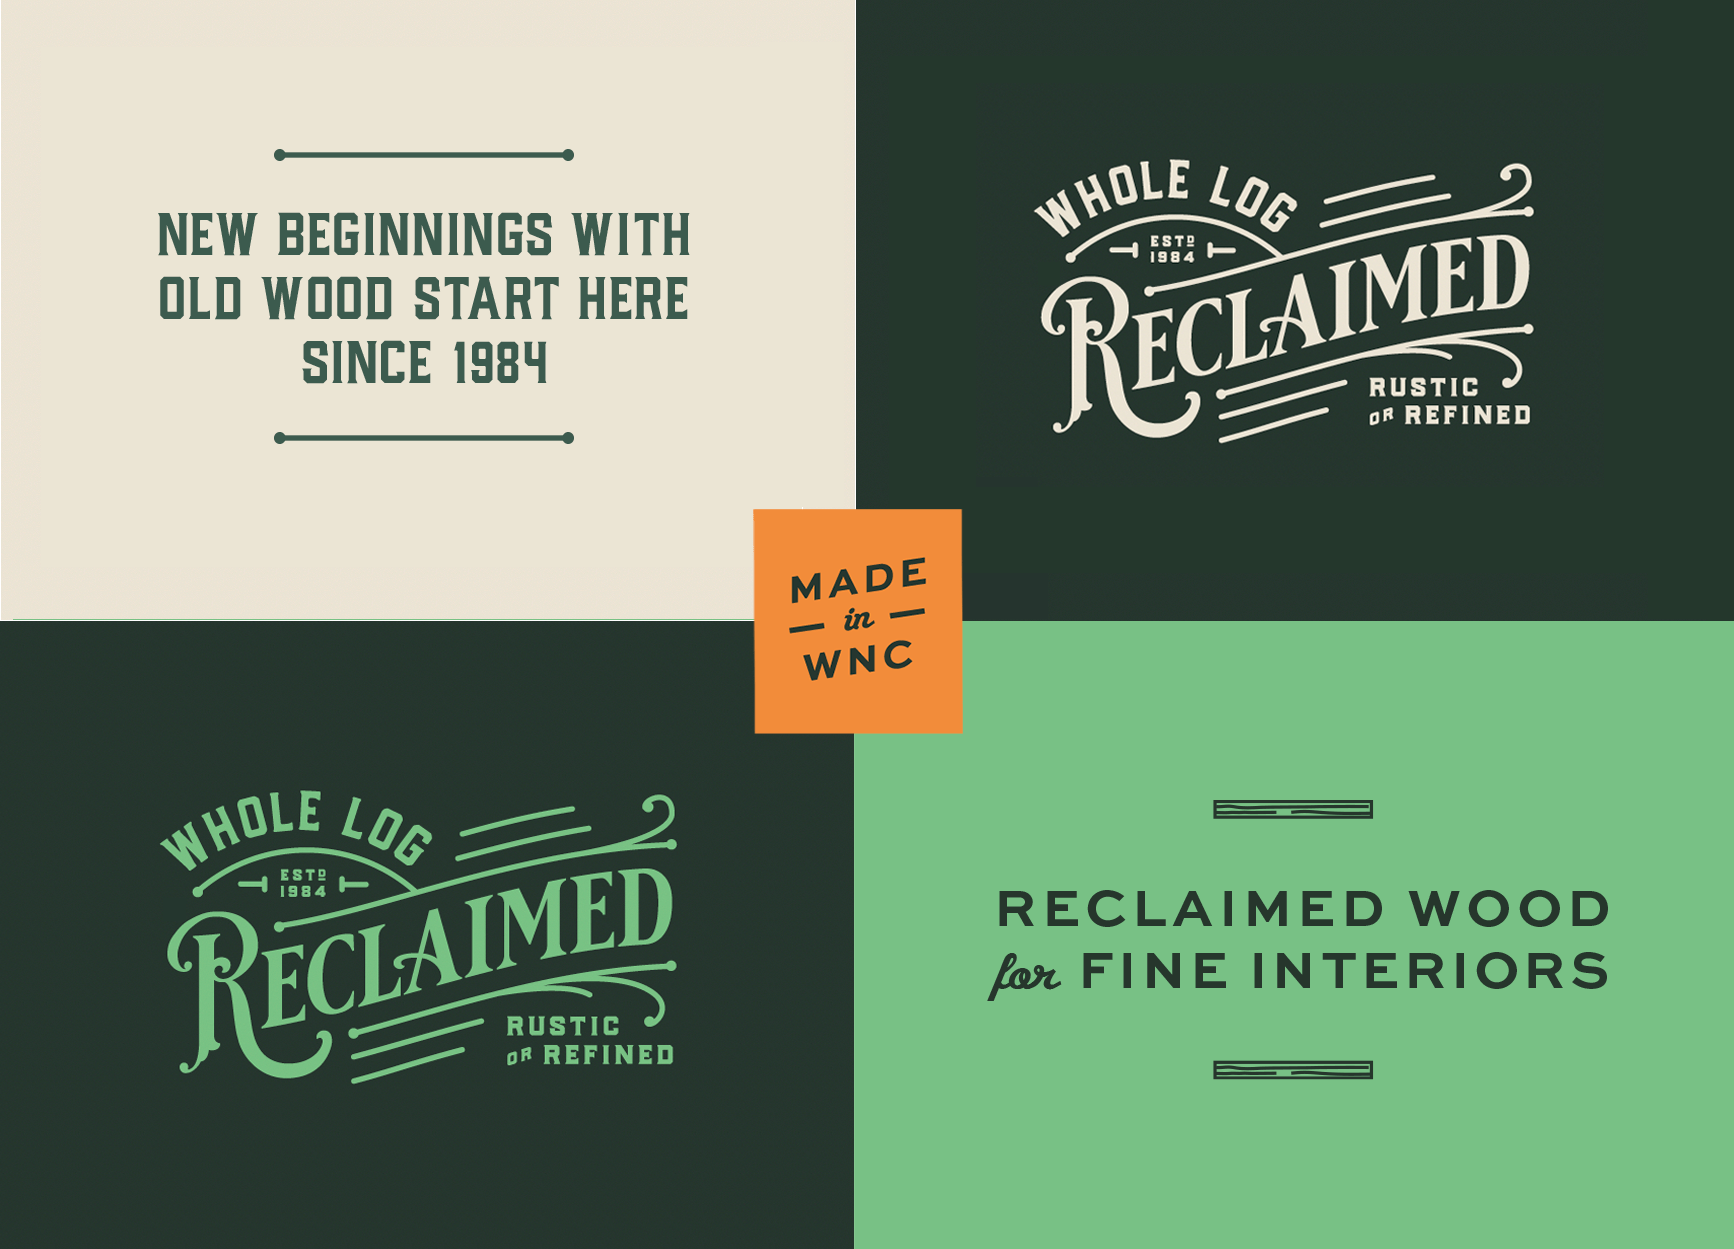 Whole Log Reclaimed logo lockups and other graphic elements